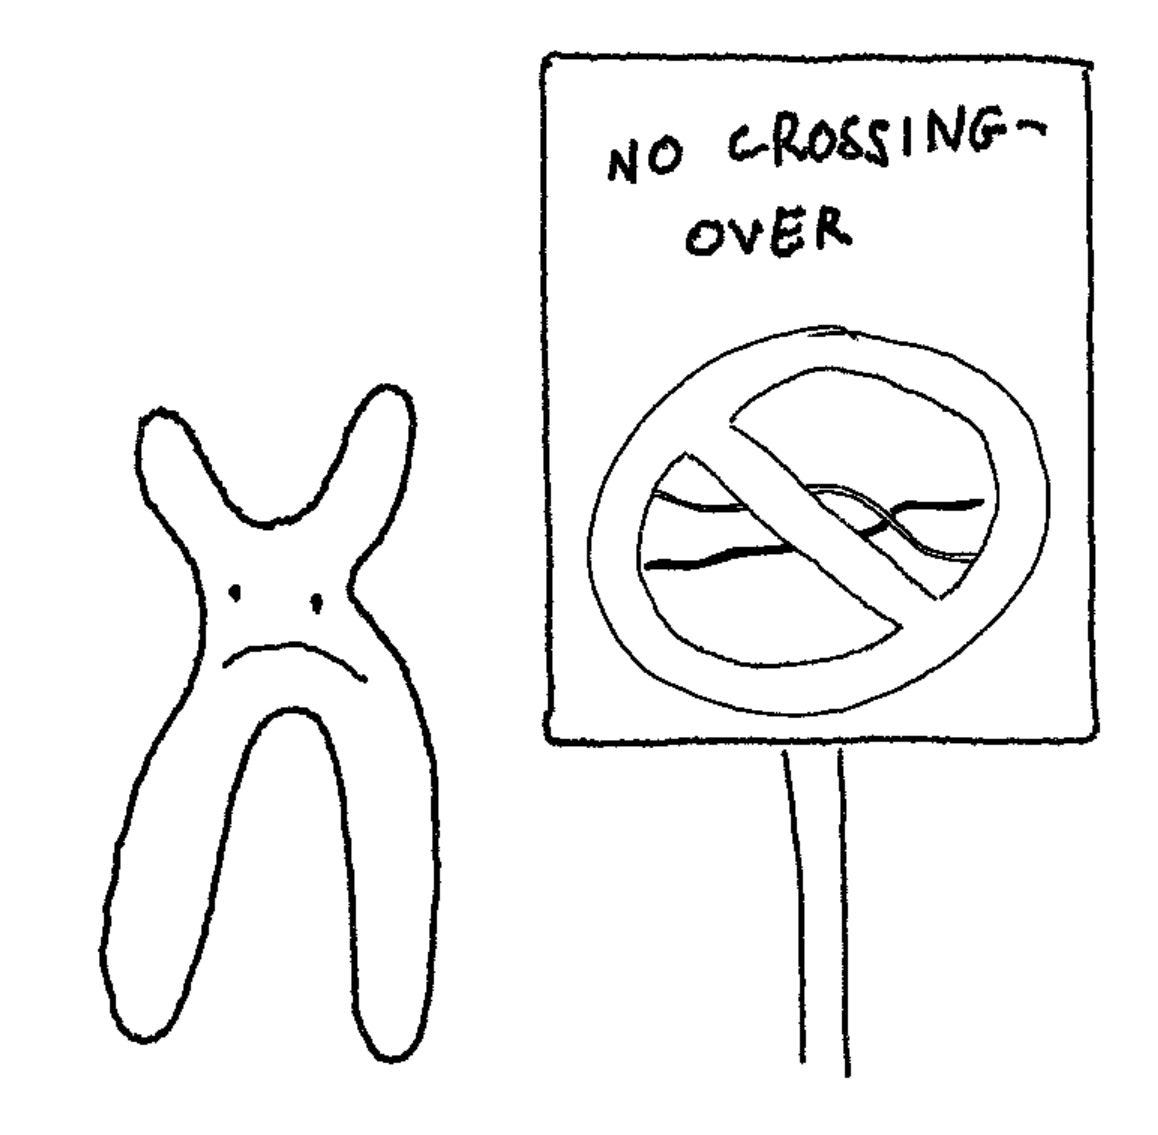  No crossing-over: a sad chromosome stands beside a sign depicting a crossed-out recombination event, with text 'No crossing-over' 